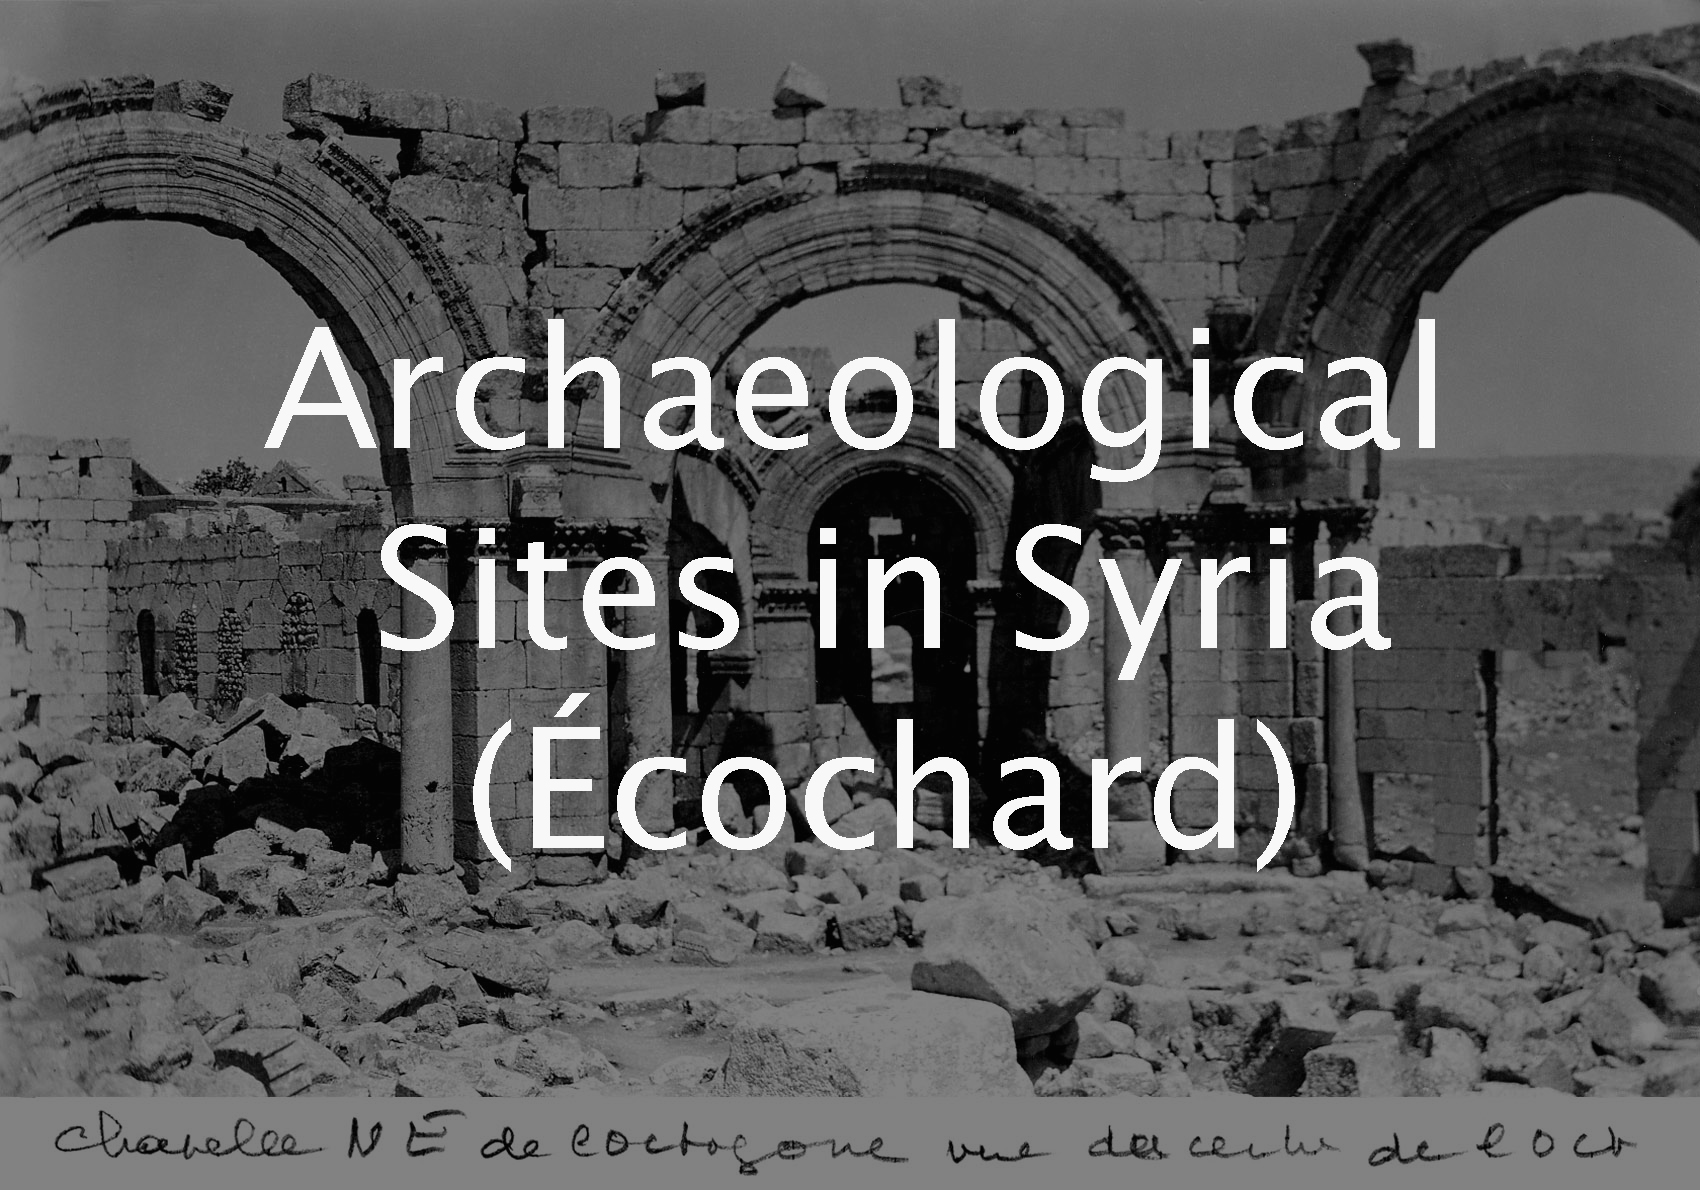 Écochard: Archaeological Sites in Syria in the 1930s